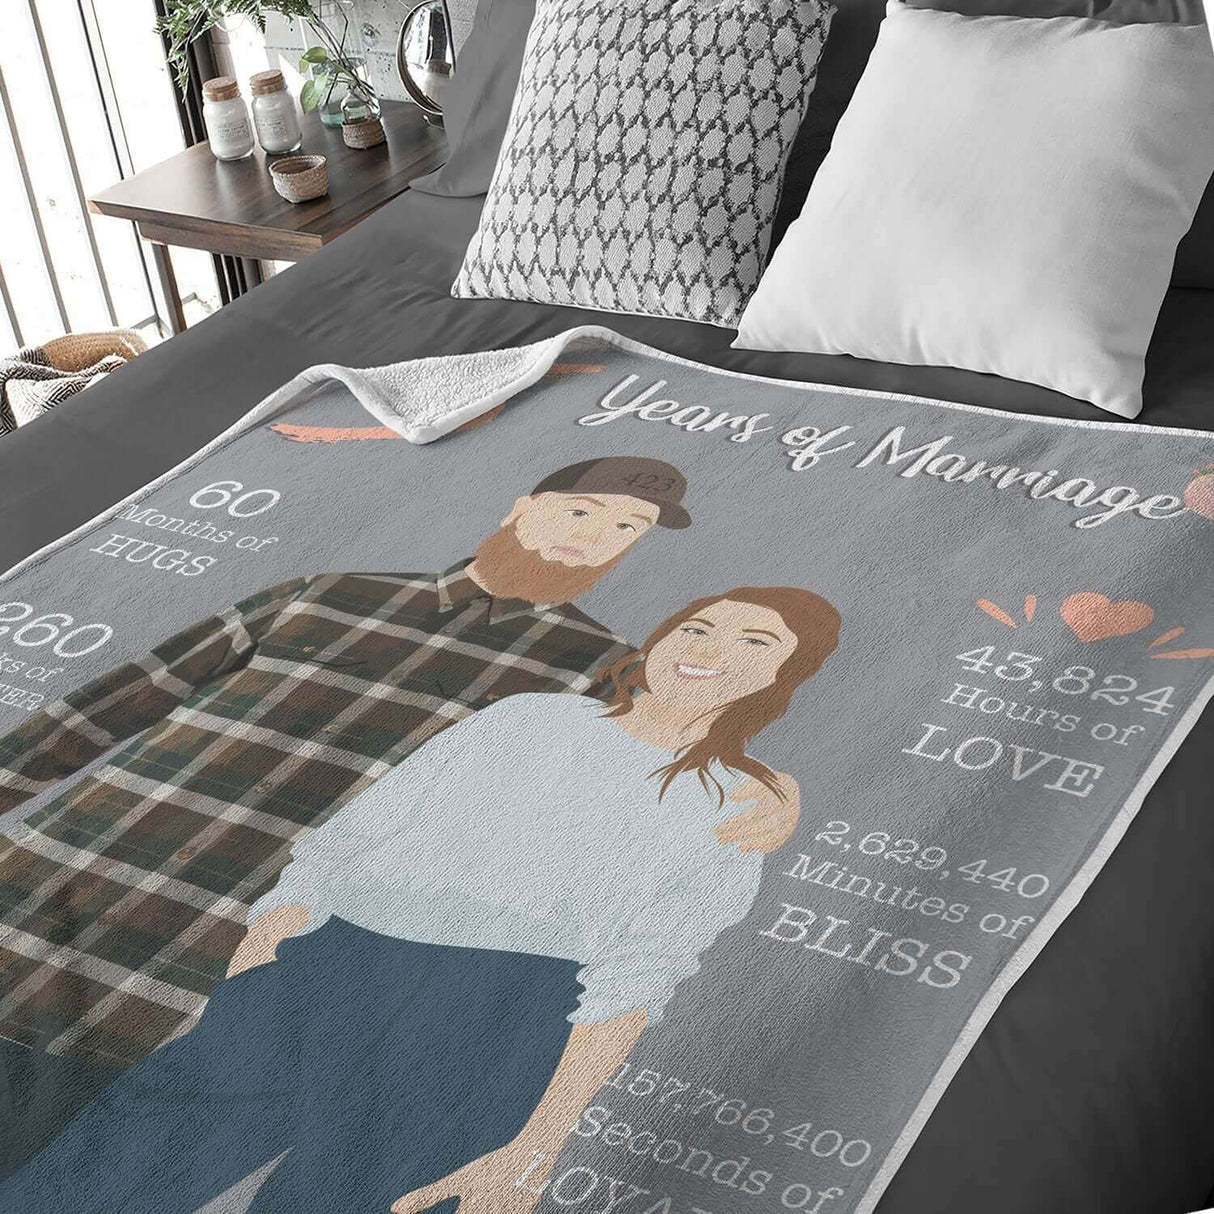 5 Years of Marriage Anniversary Blanket Personalized